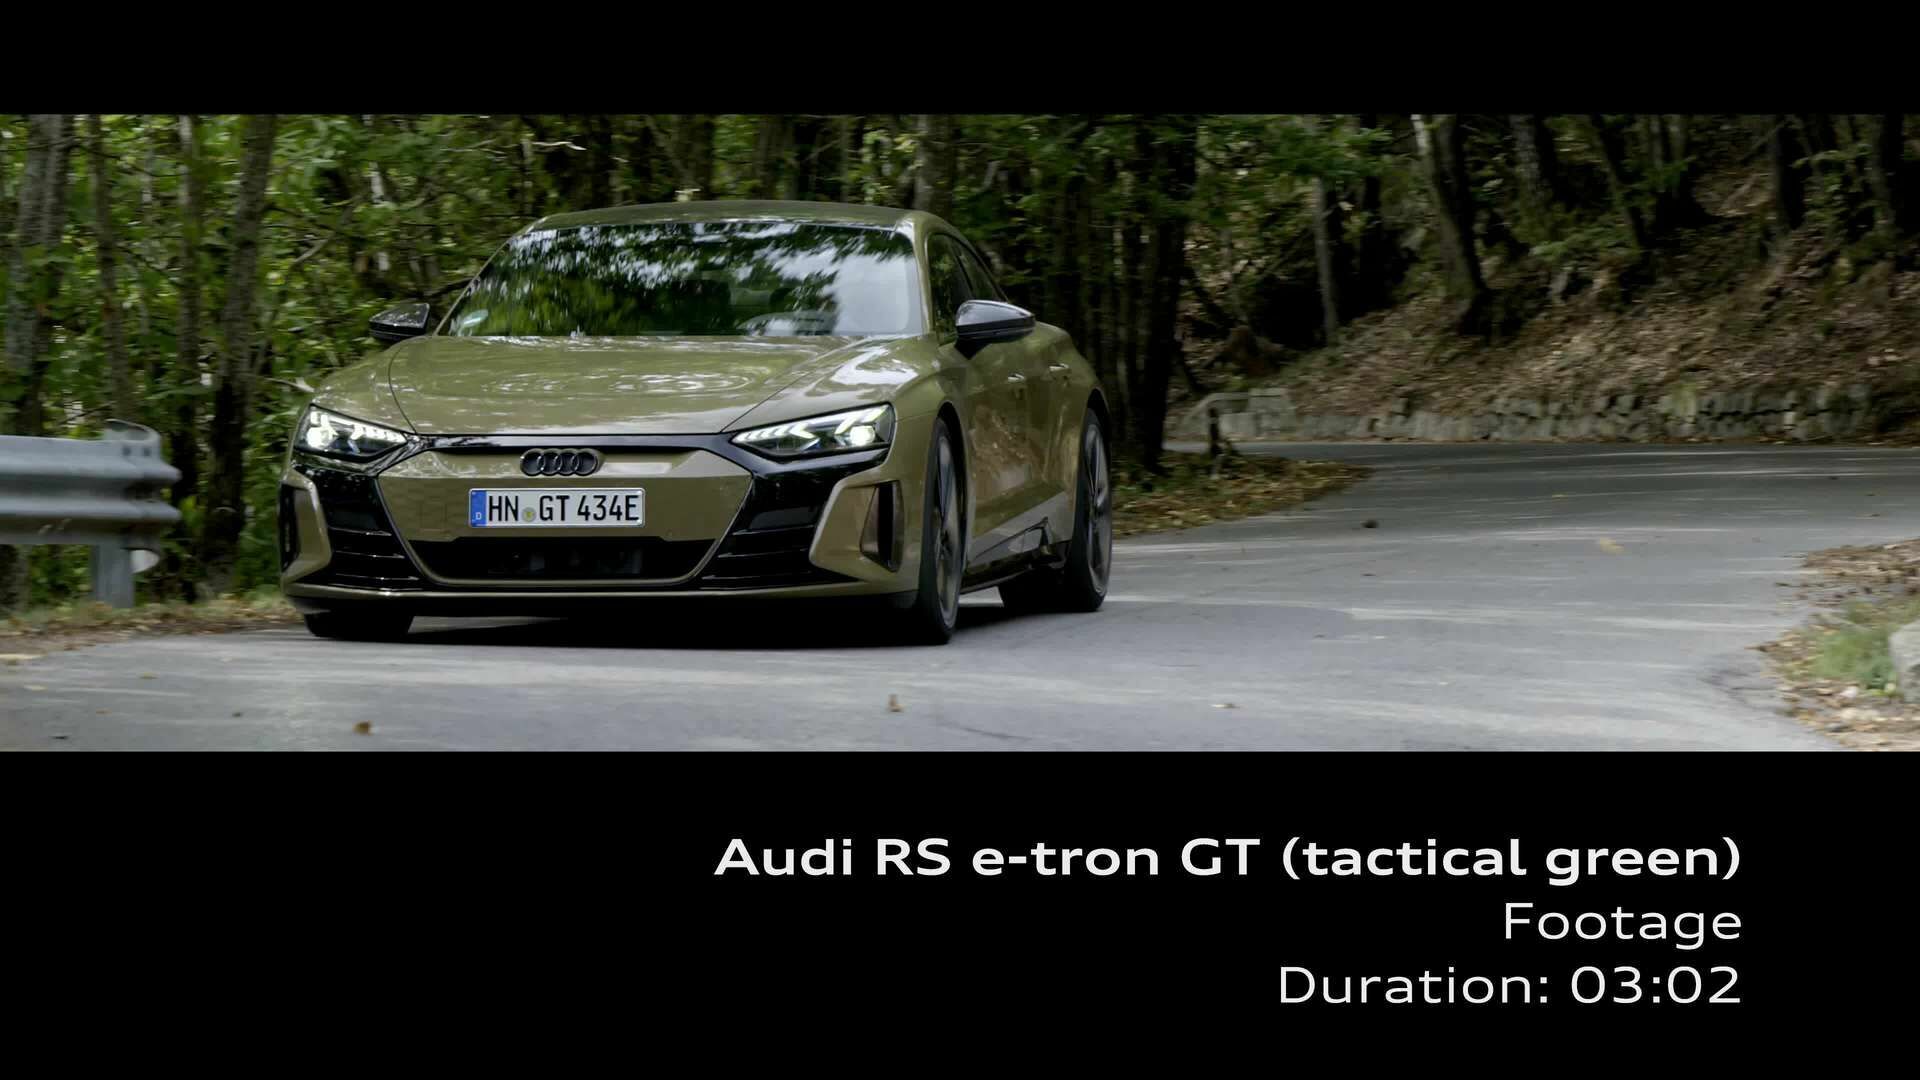 Footage: Audi RS e-tron GT Tactitcal green